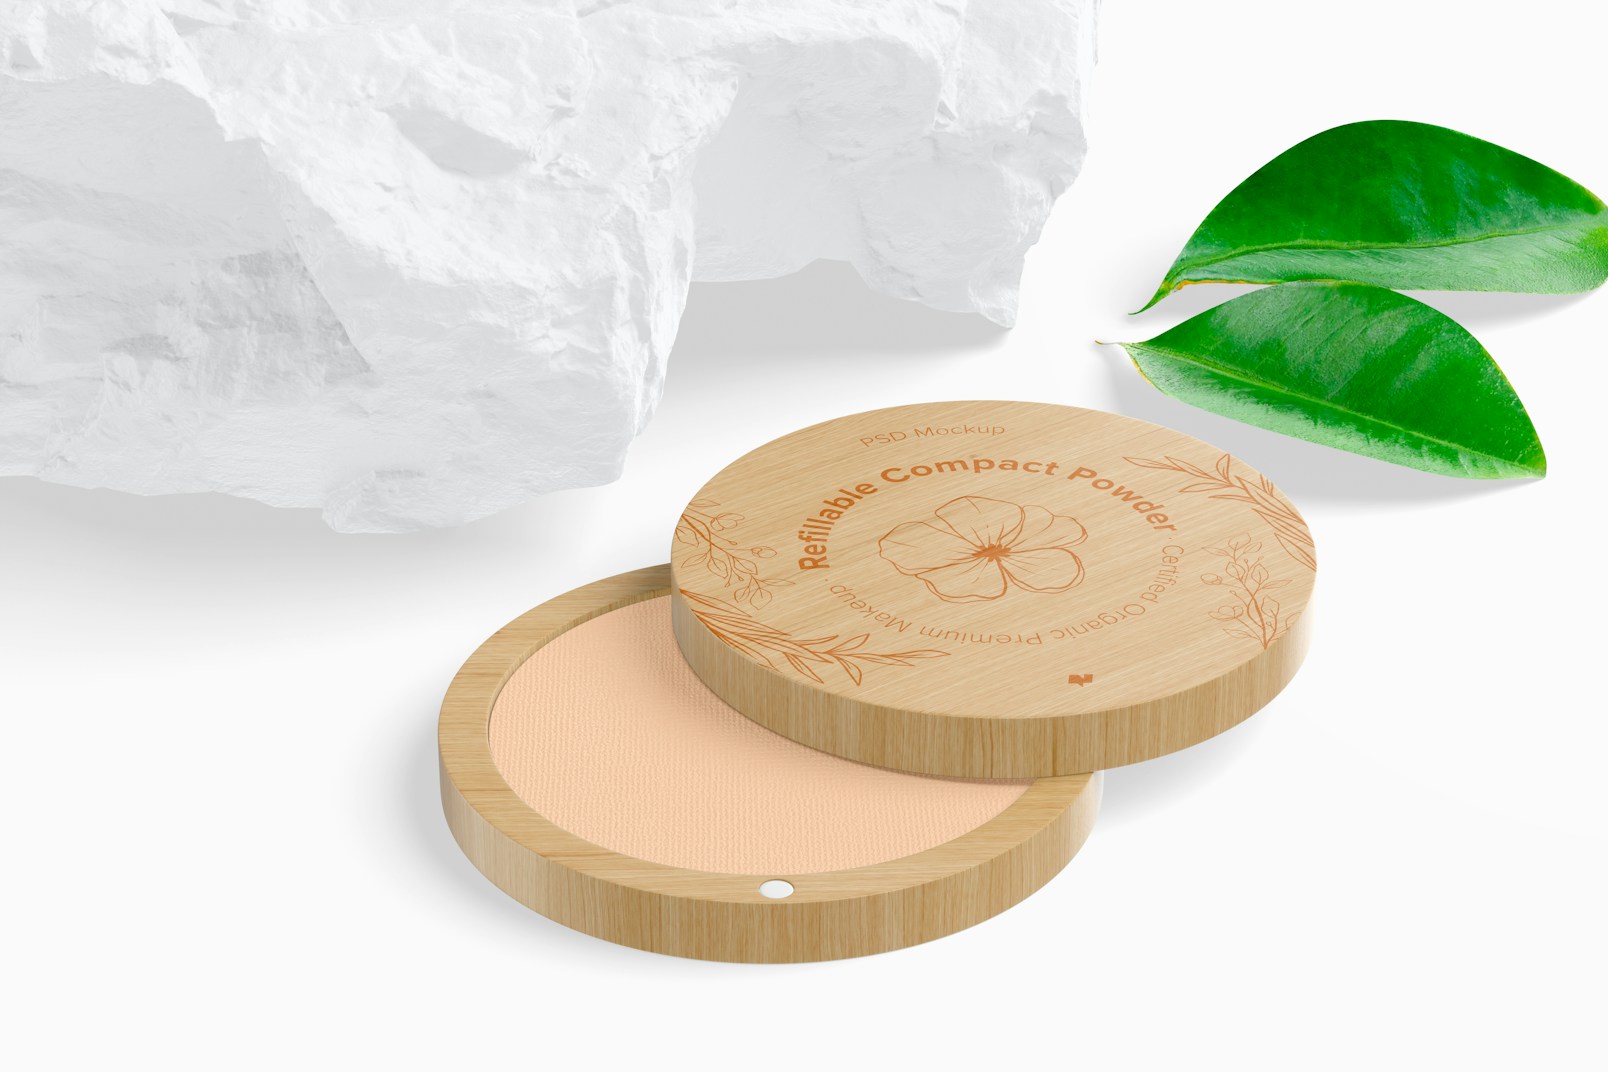 Refillable Compact Powder Mockup, Perspective View